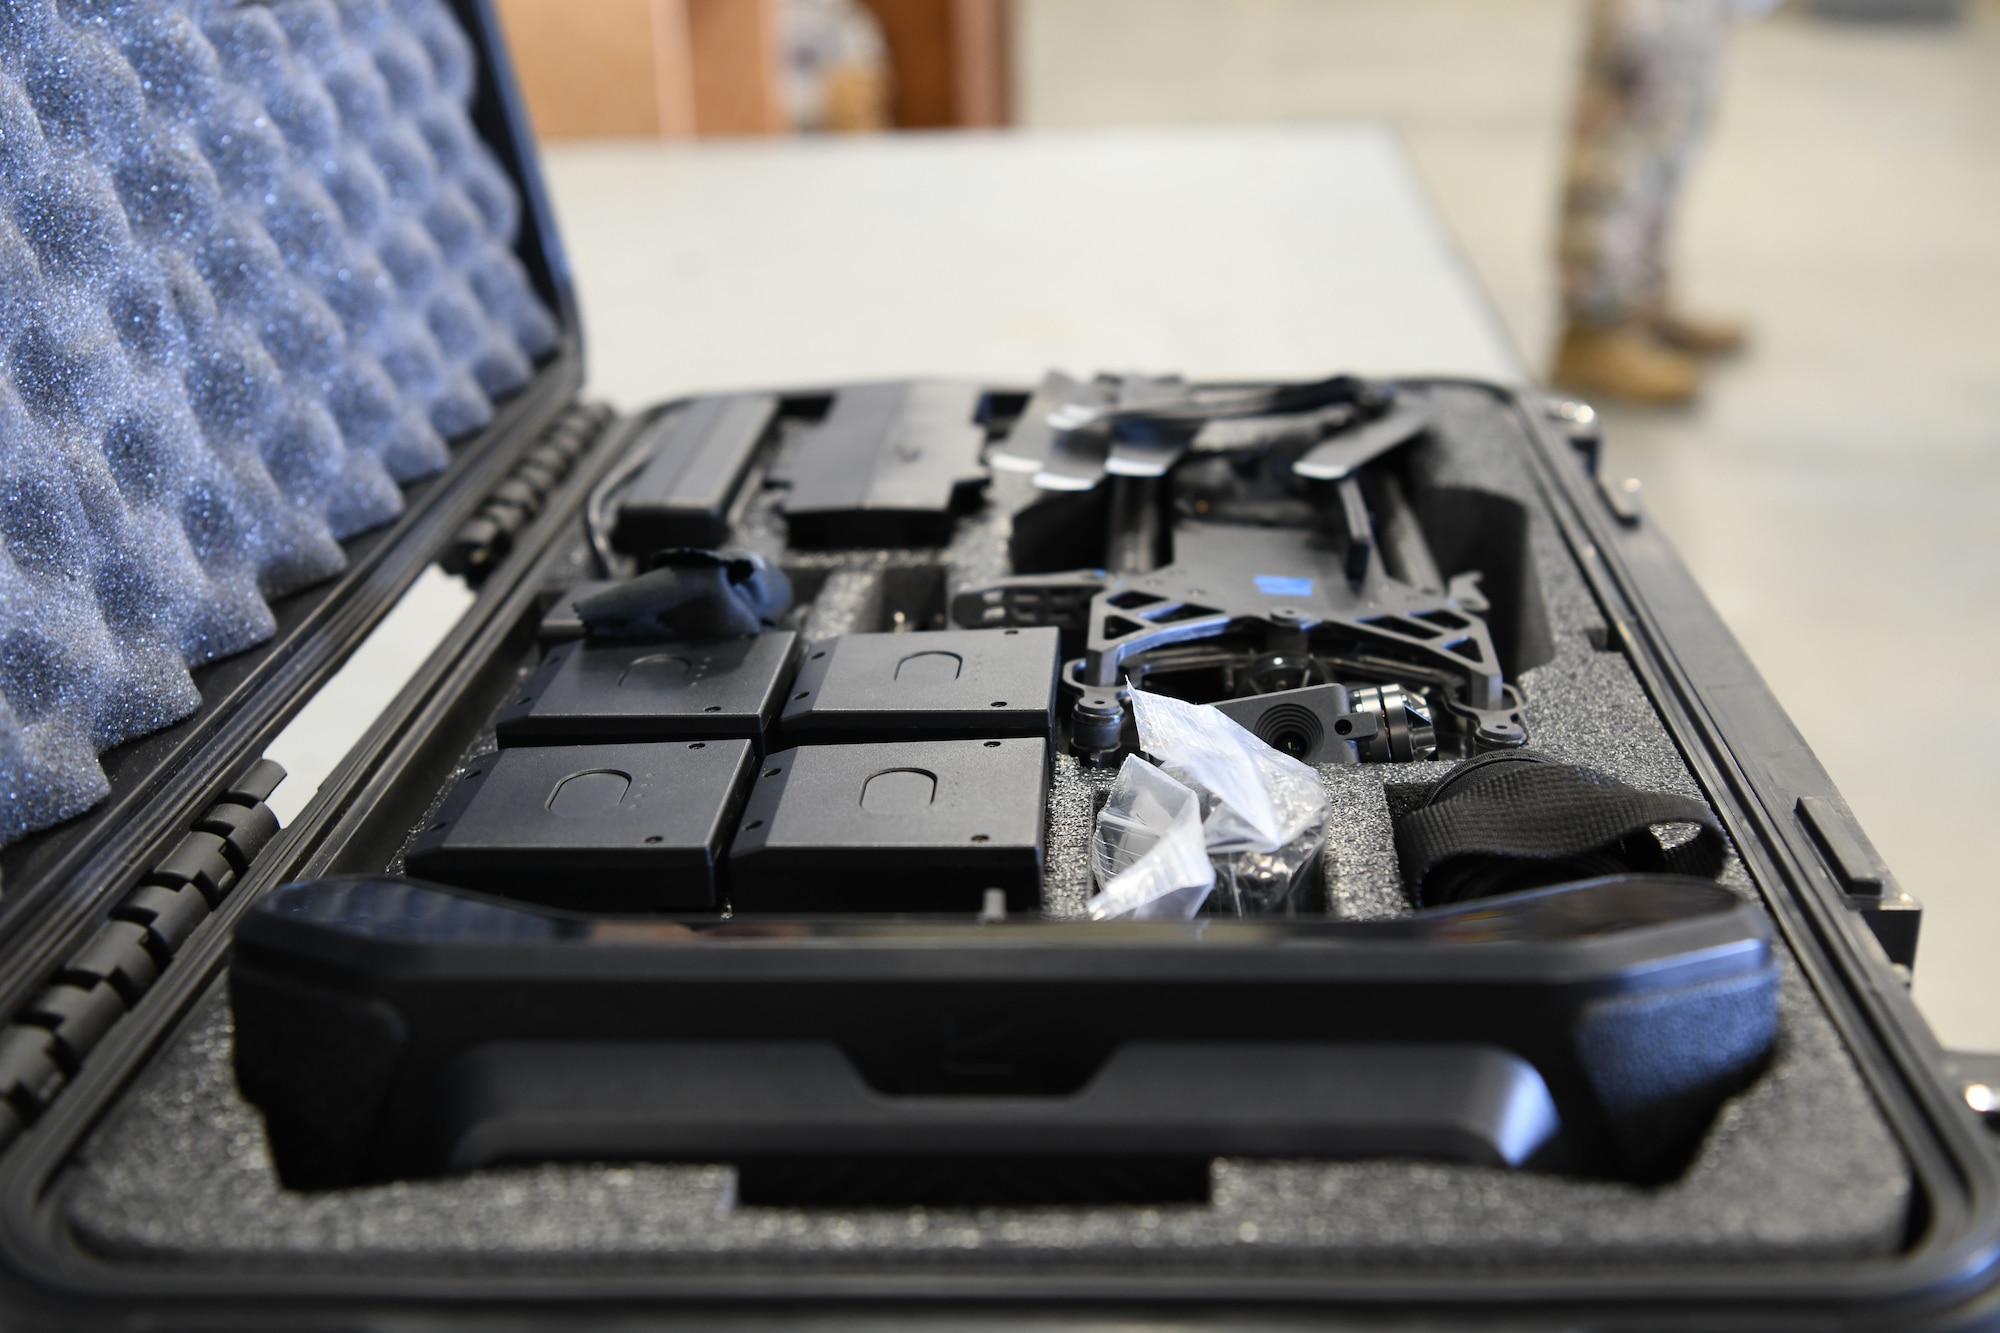 Drone parts rest in a case.